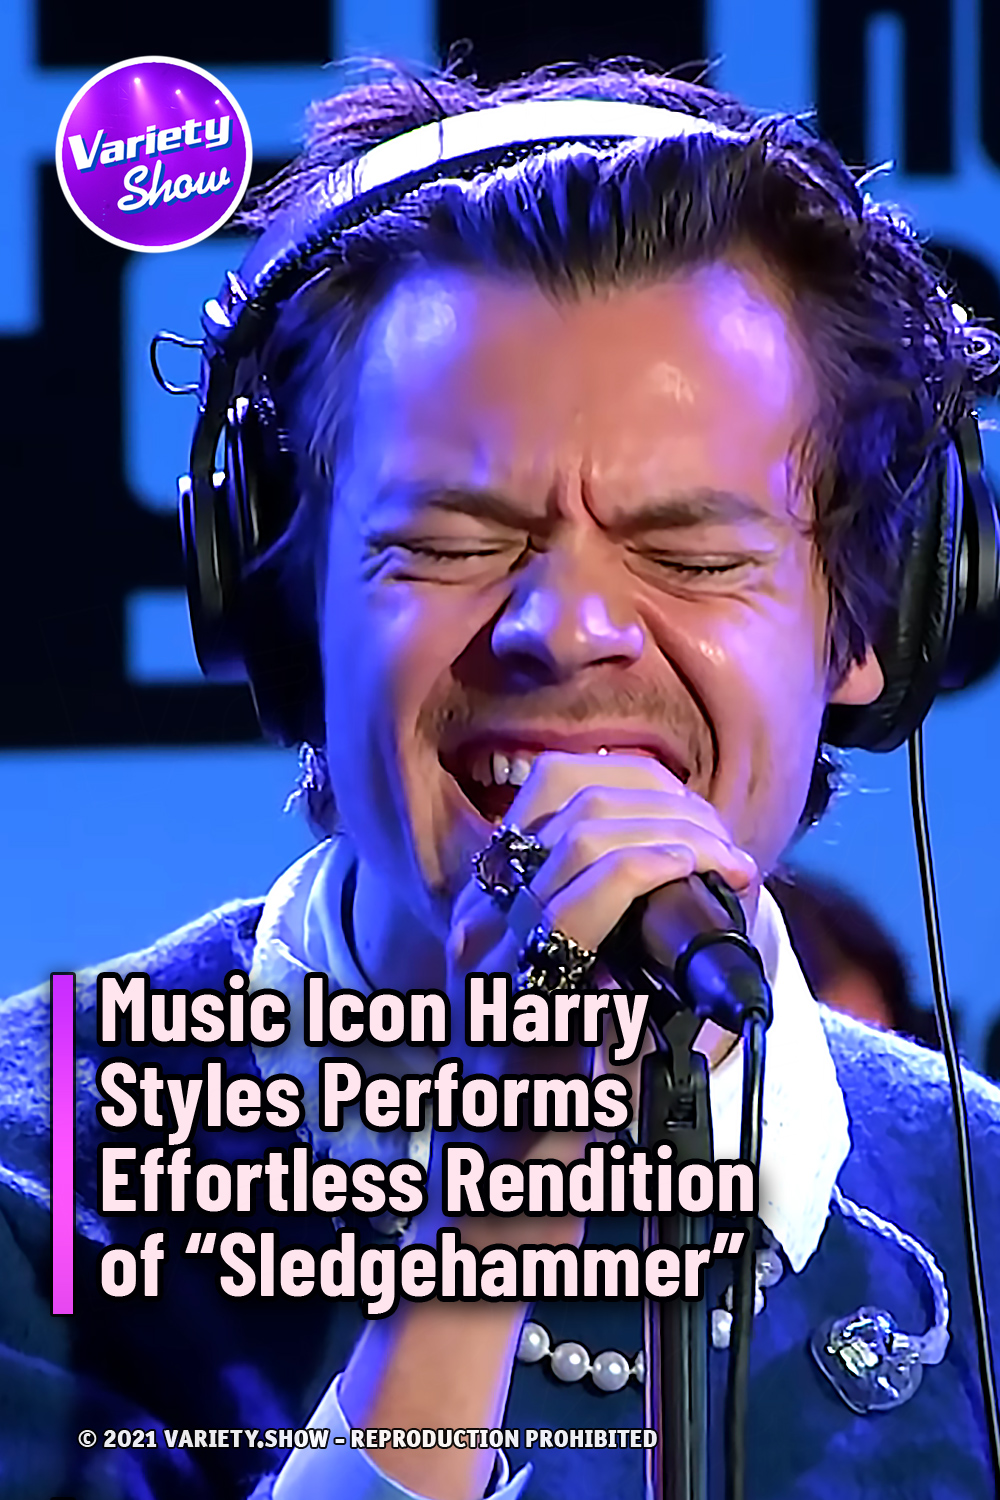 Music Icon Harry Styles Performs Effortless Rendition of “Sledgehammer”